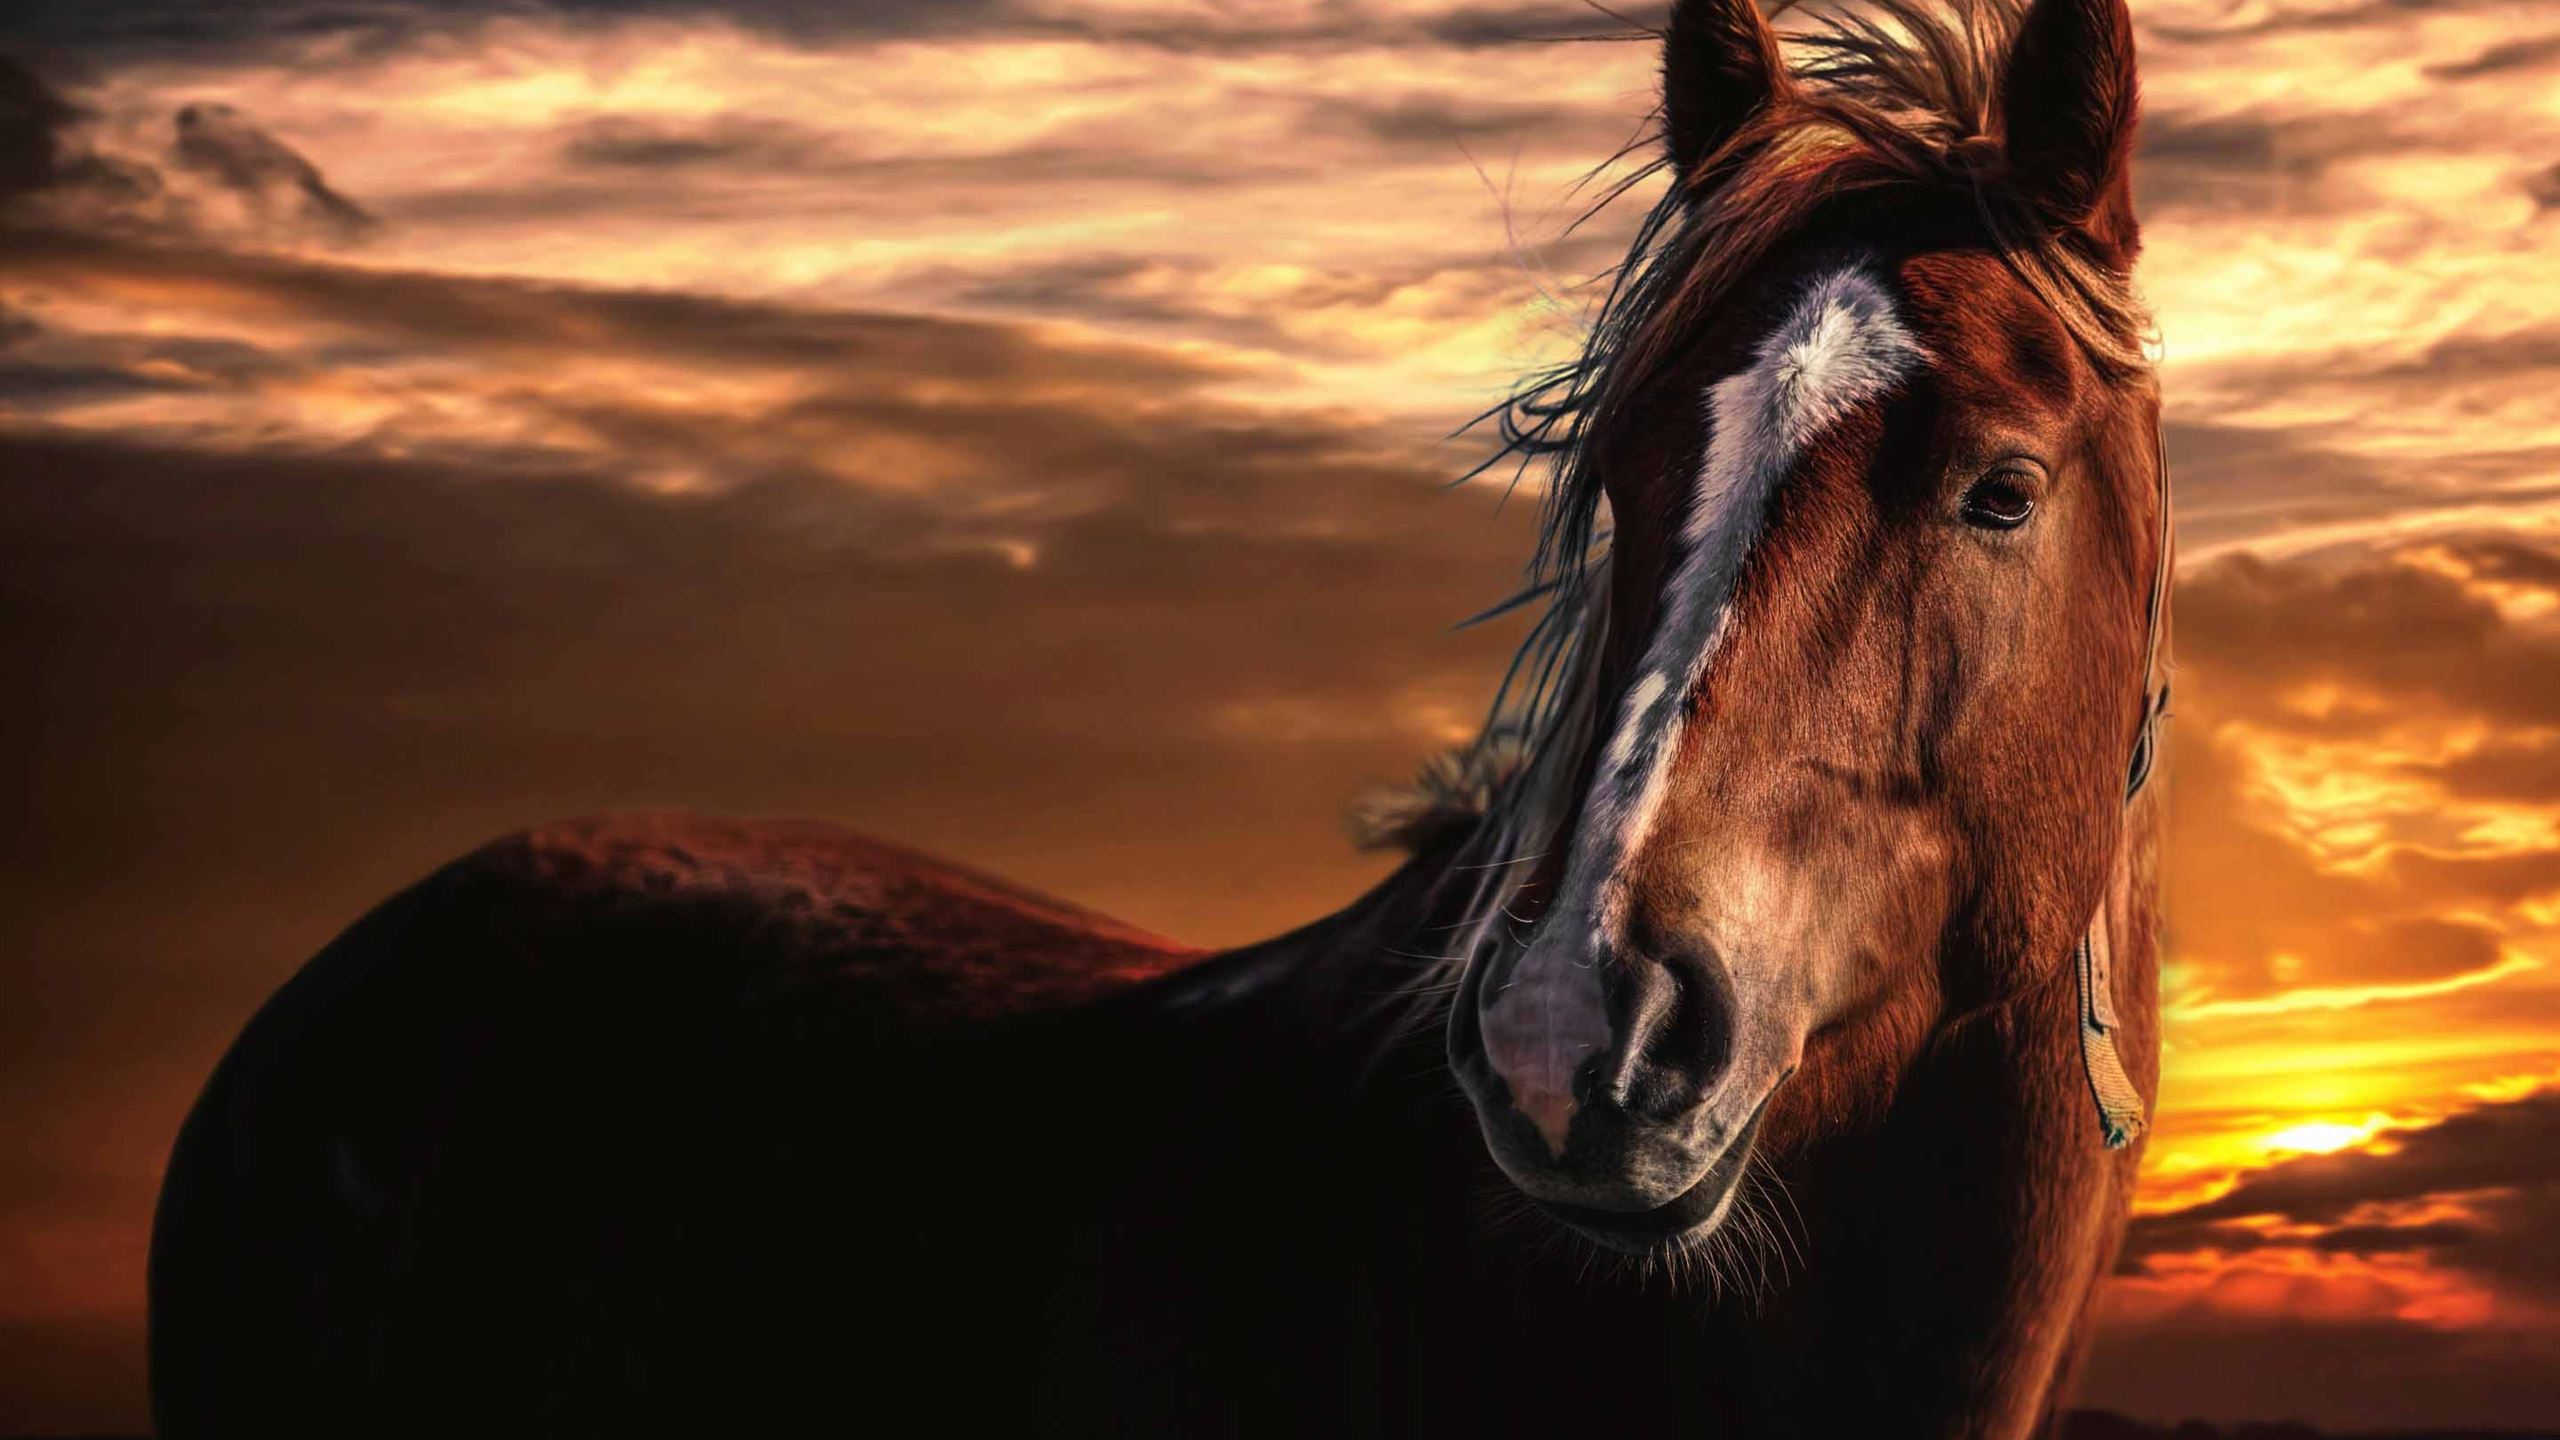 Horse game download